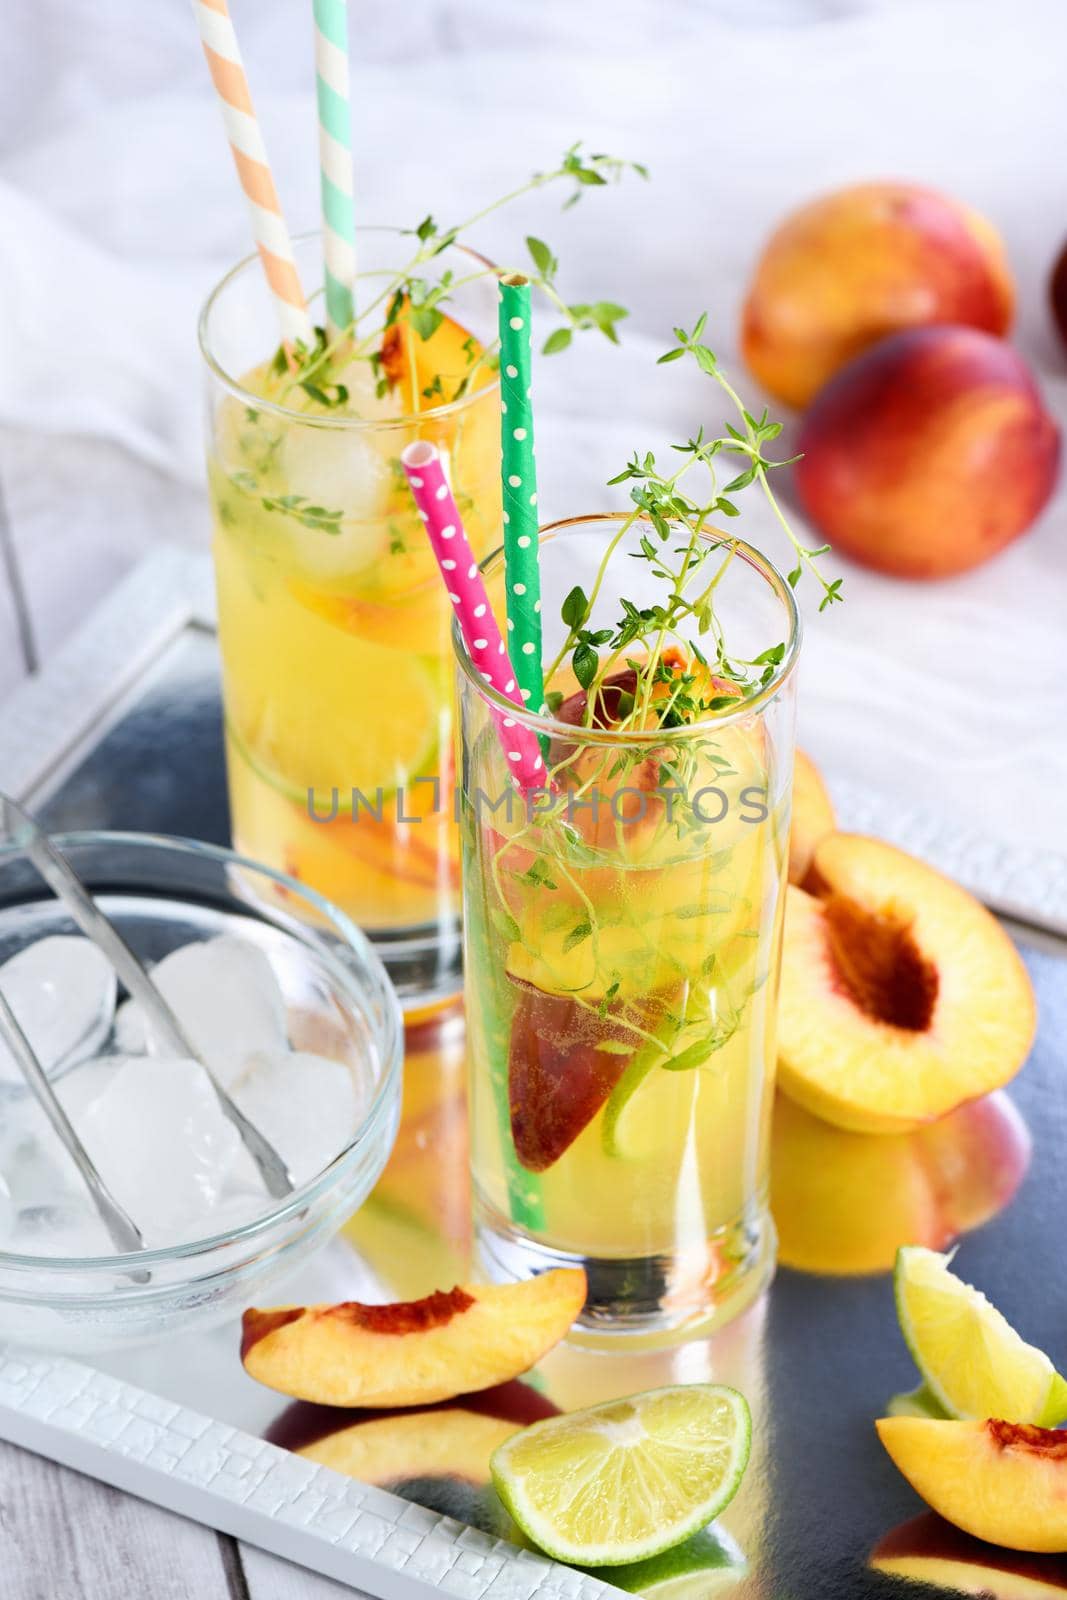 Peach lemonade with thyme by Apolonia